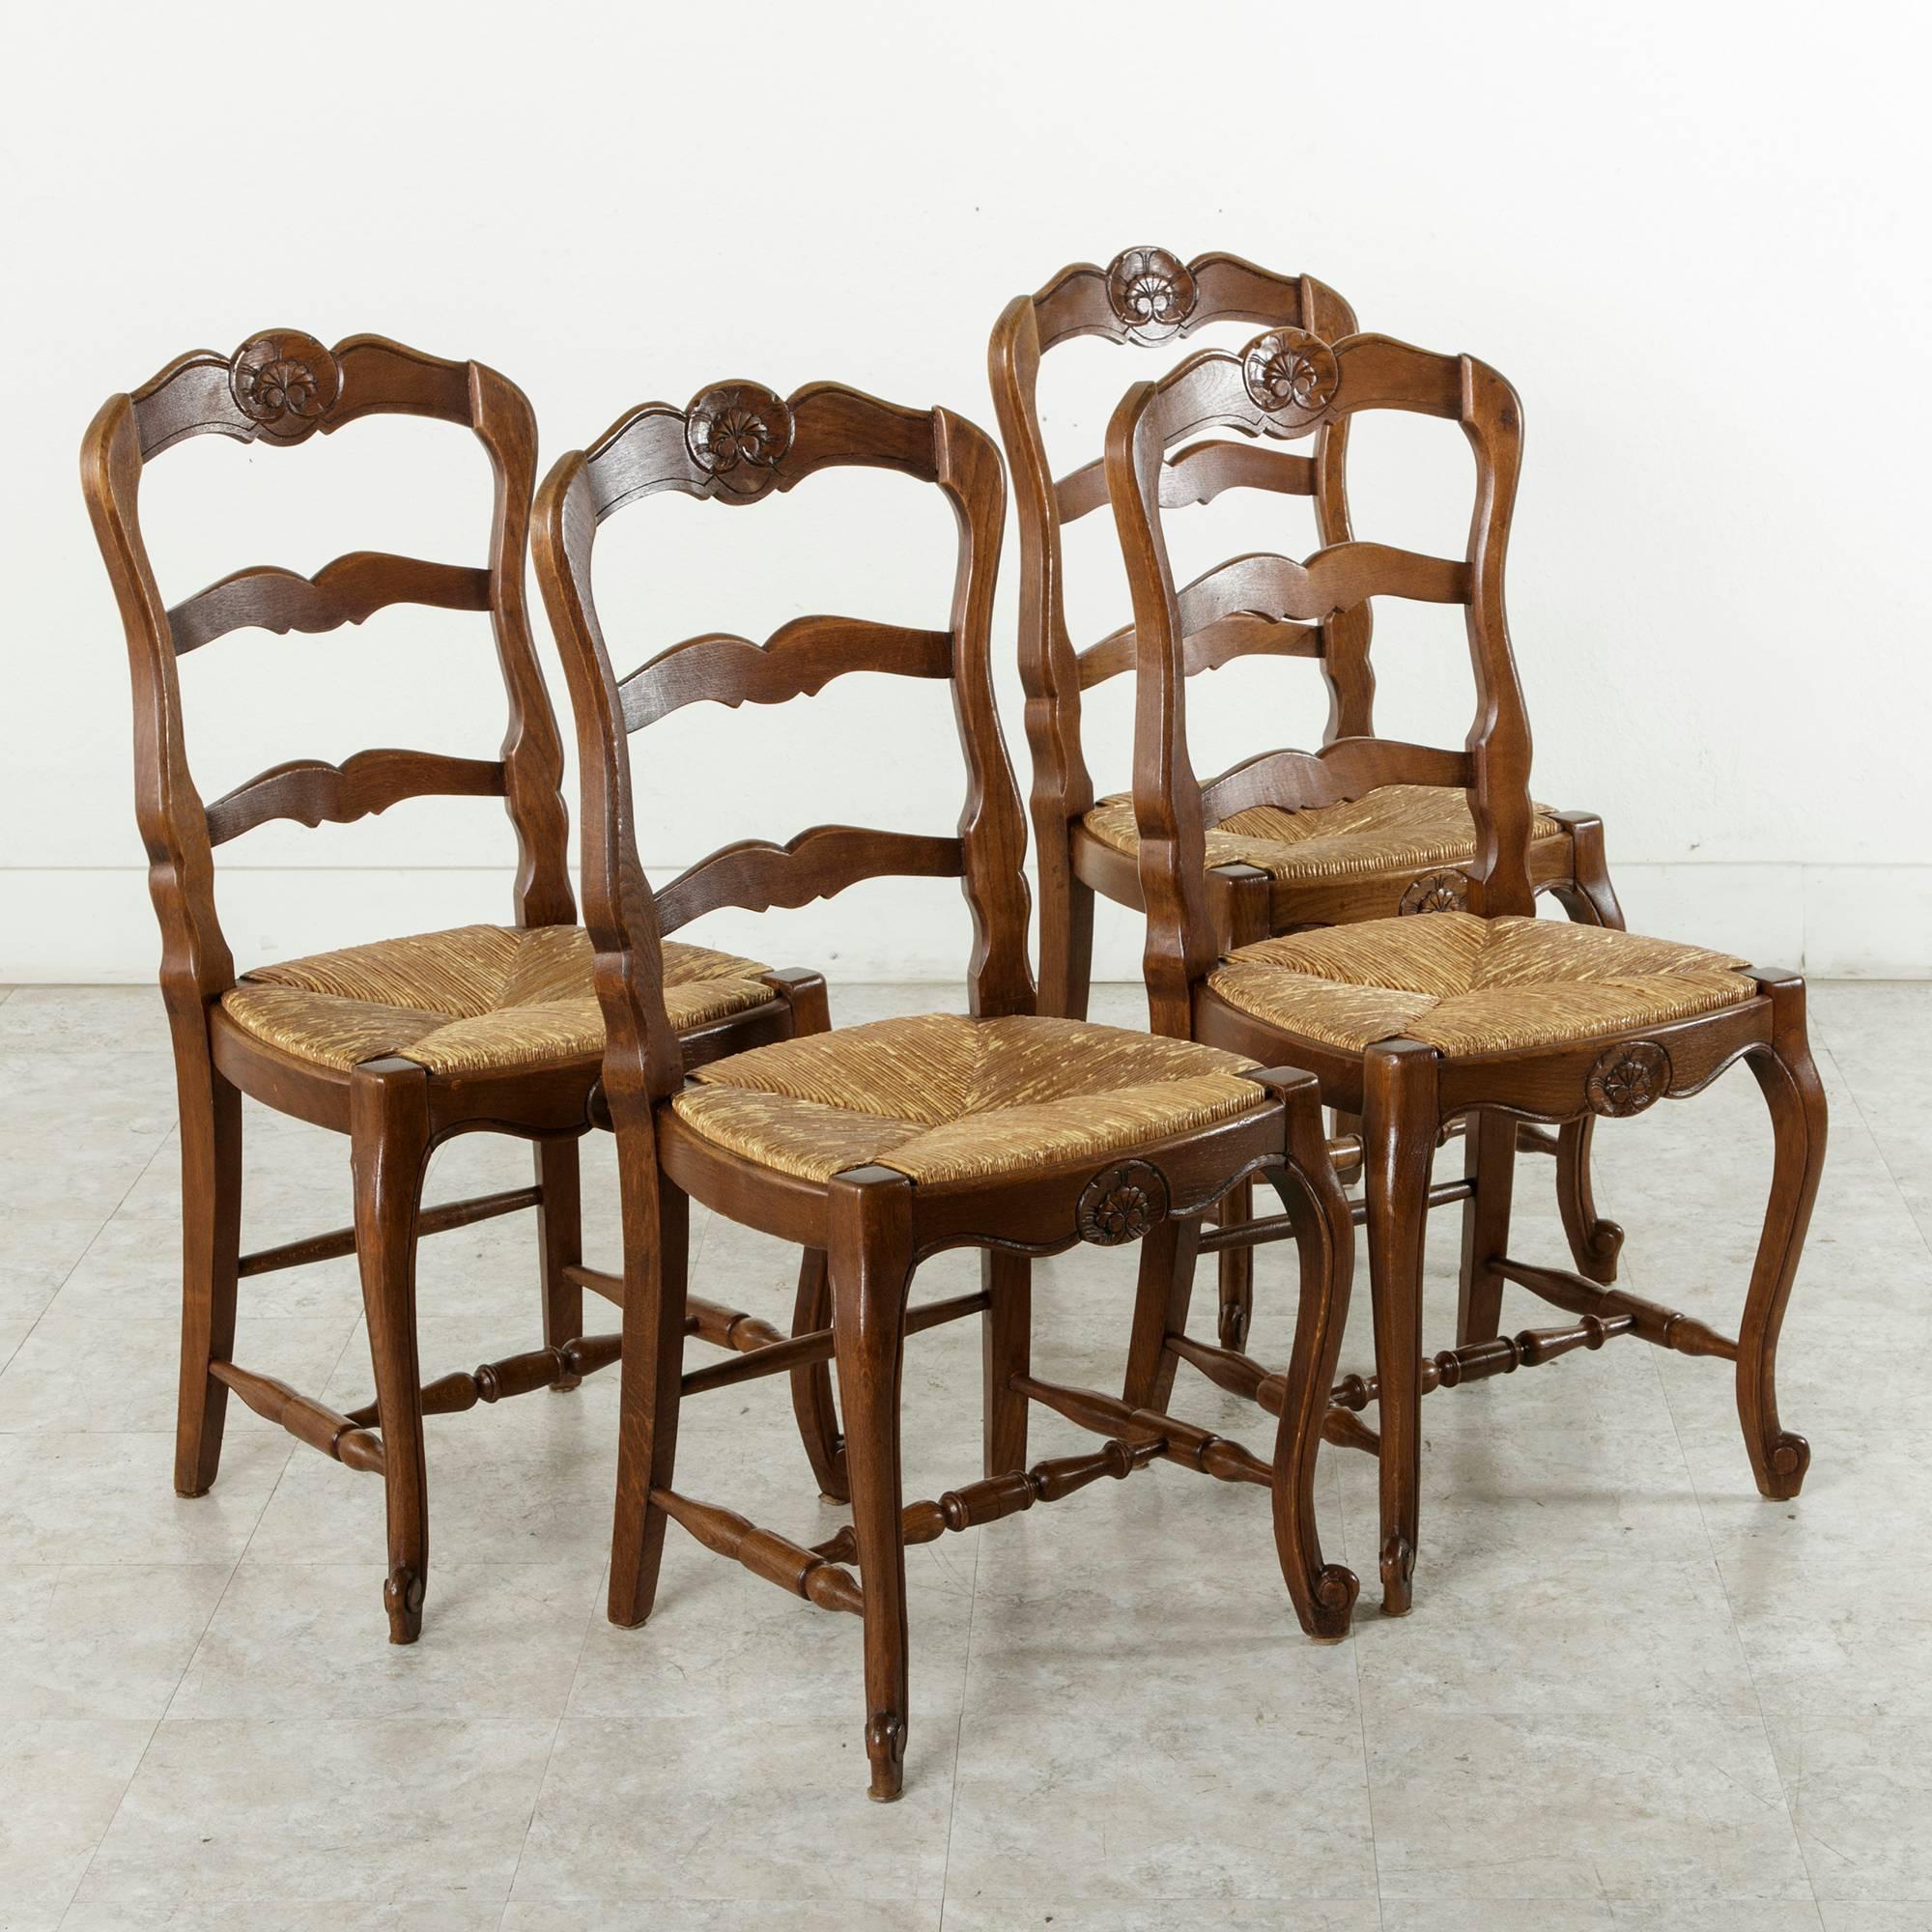 These French oak Louis XV style chairs feature a hand carved shell on both the upper ladderback as well as on the apron. Cabriole legs ending in escargot feet are joined by turned, spooled stretchers on three sides as well as a central stretcher,